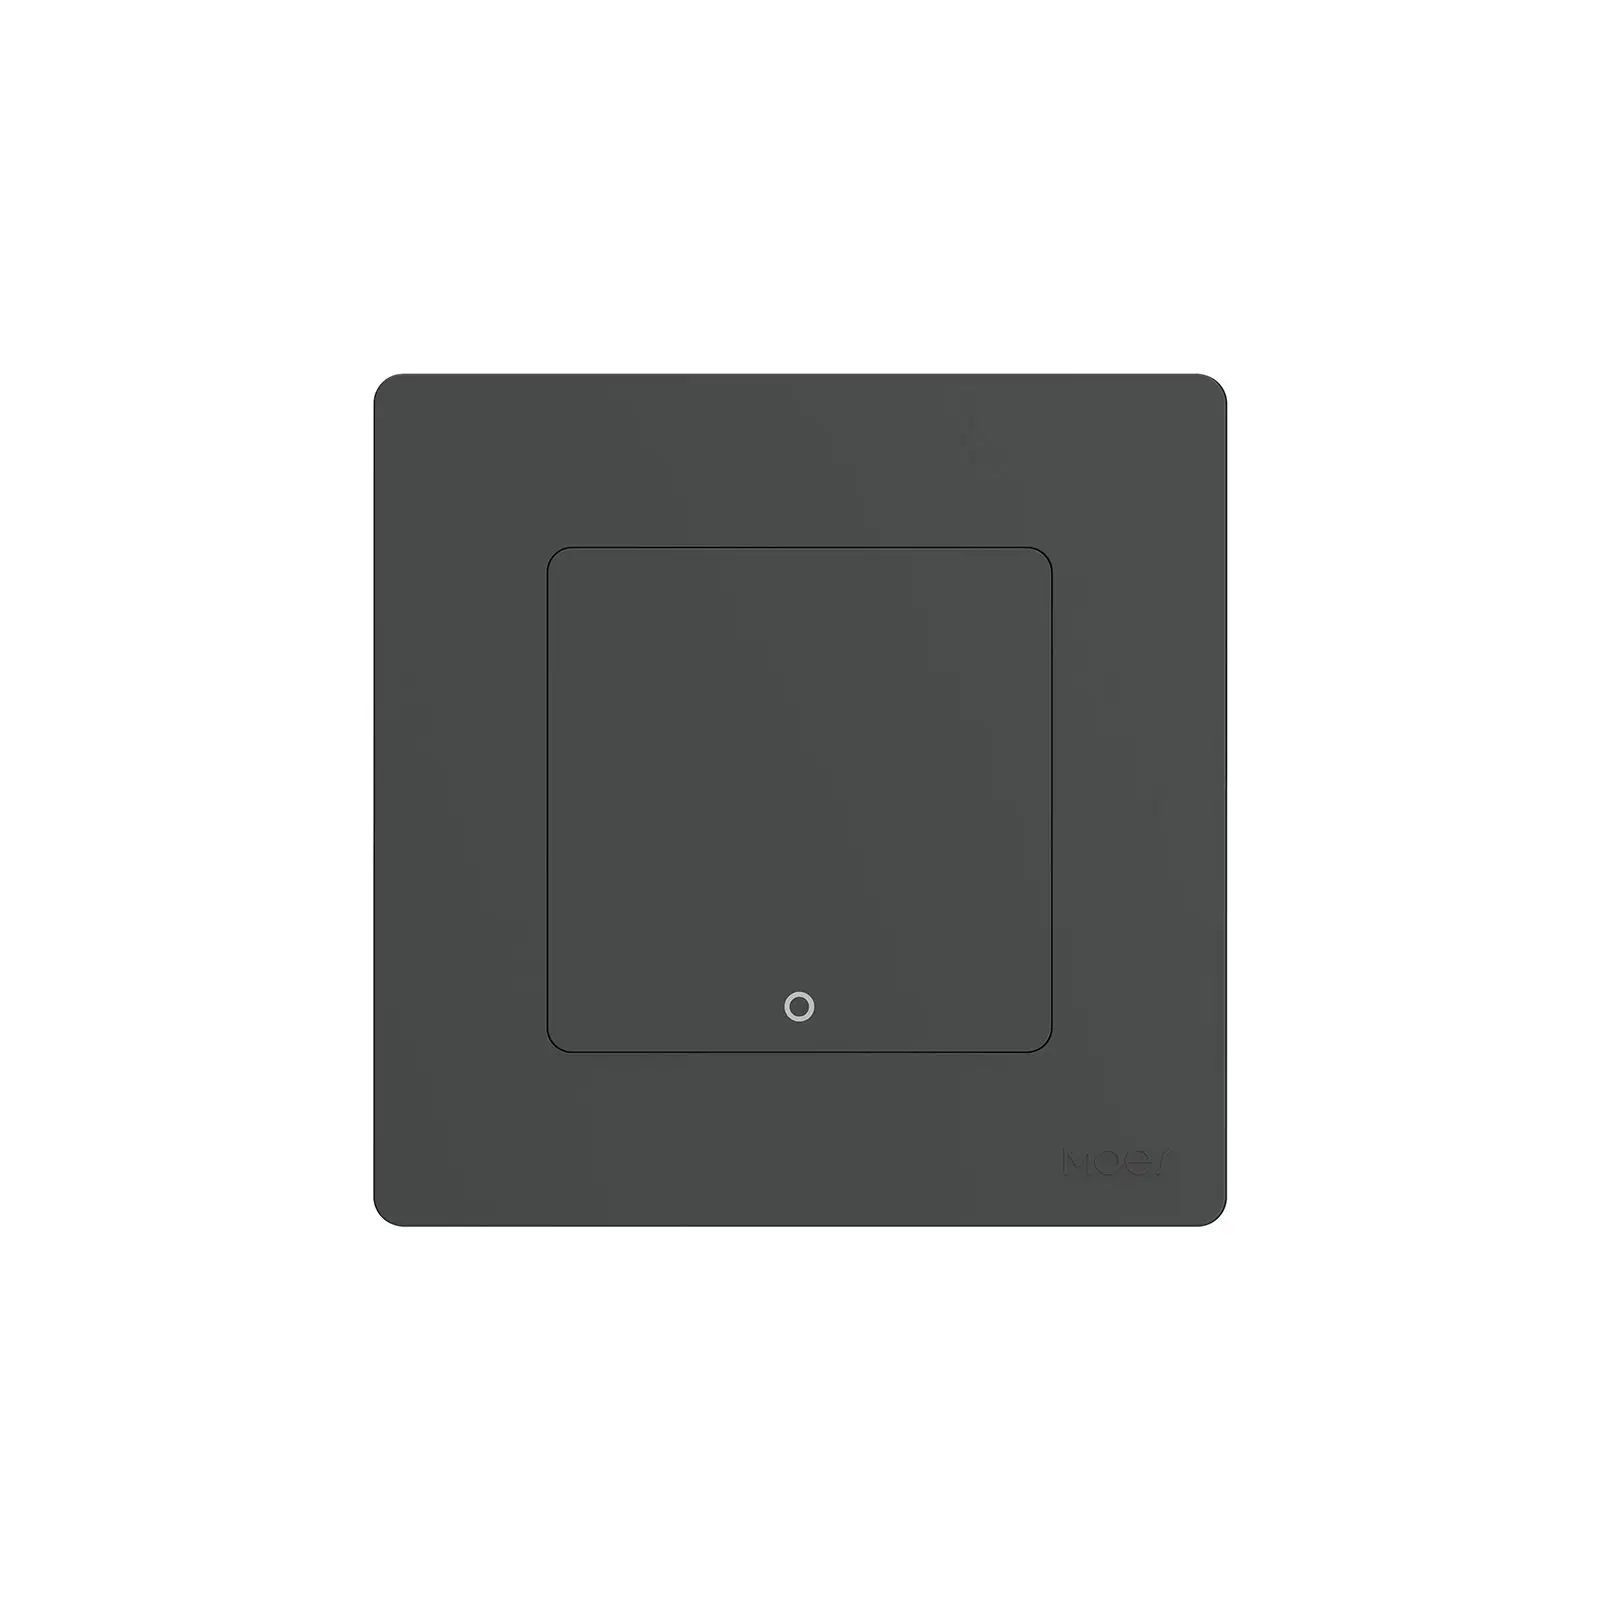 MOES New Star Ring Series Tuya Smart ZigBee3.0 Push Button Switch Embedded Light Touch Panel Grey 1 GANG Smart Switch